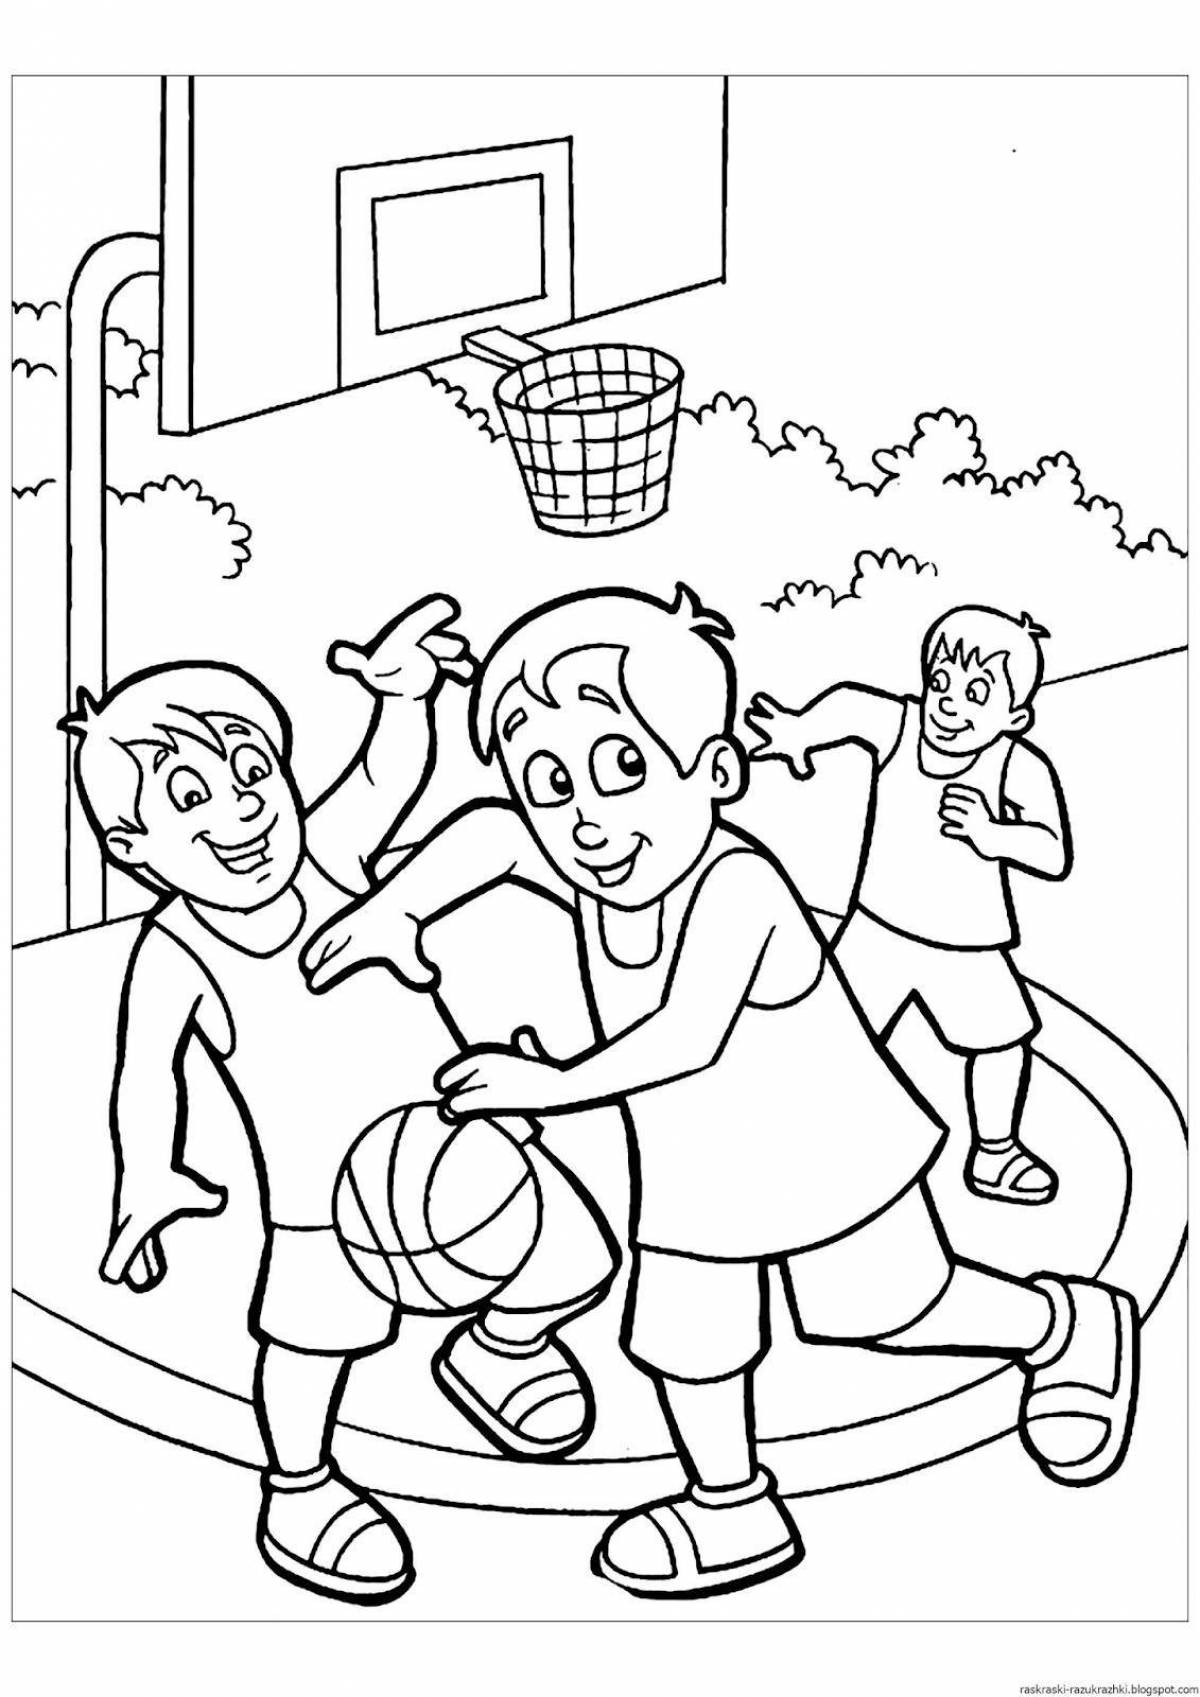 Physical Education live coloring book